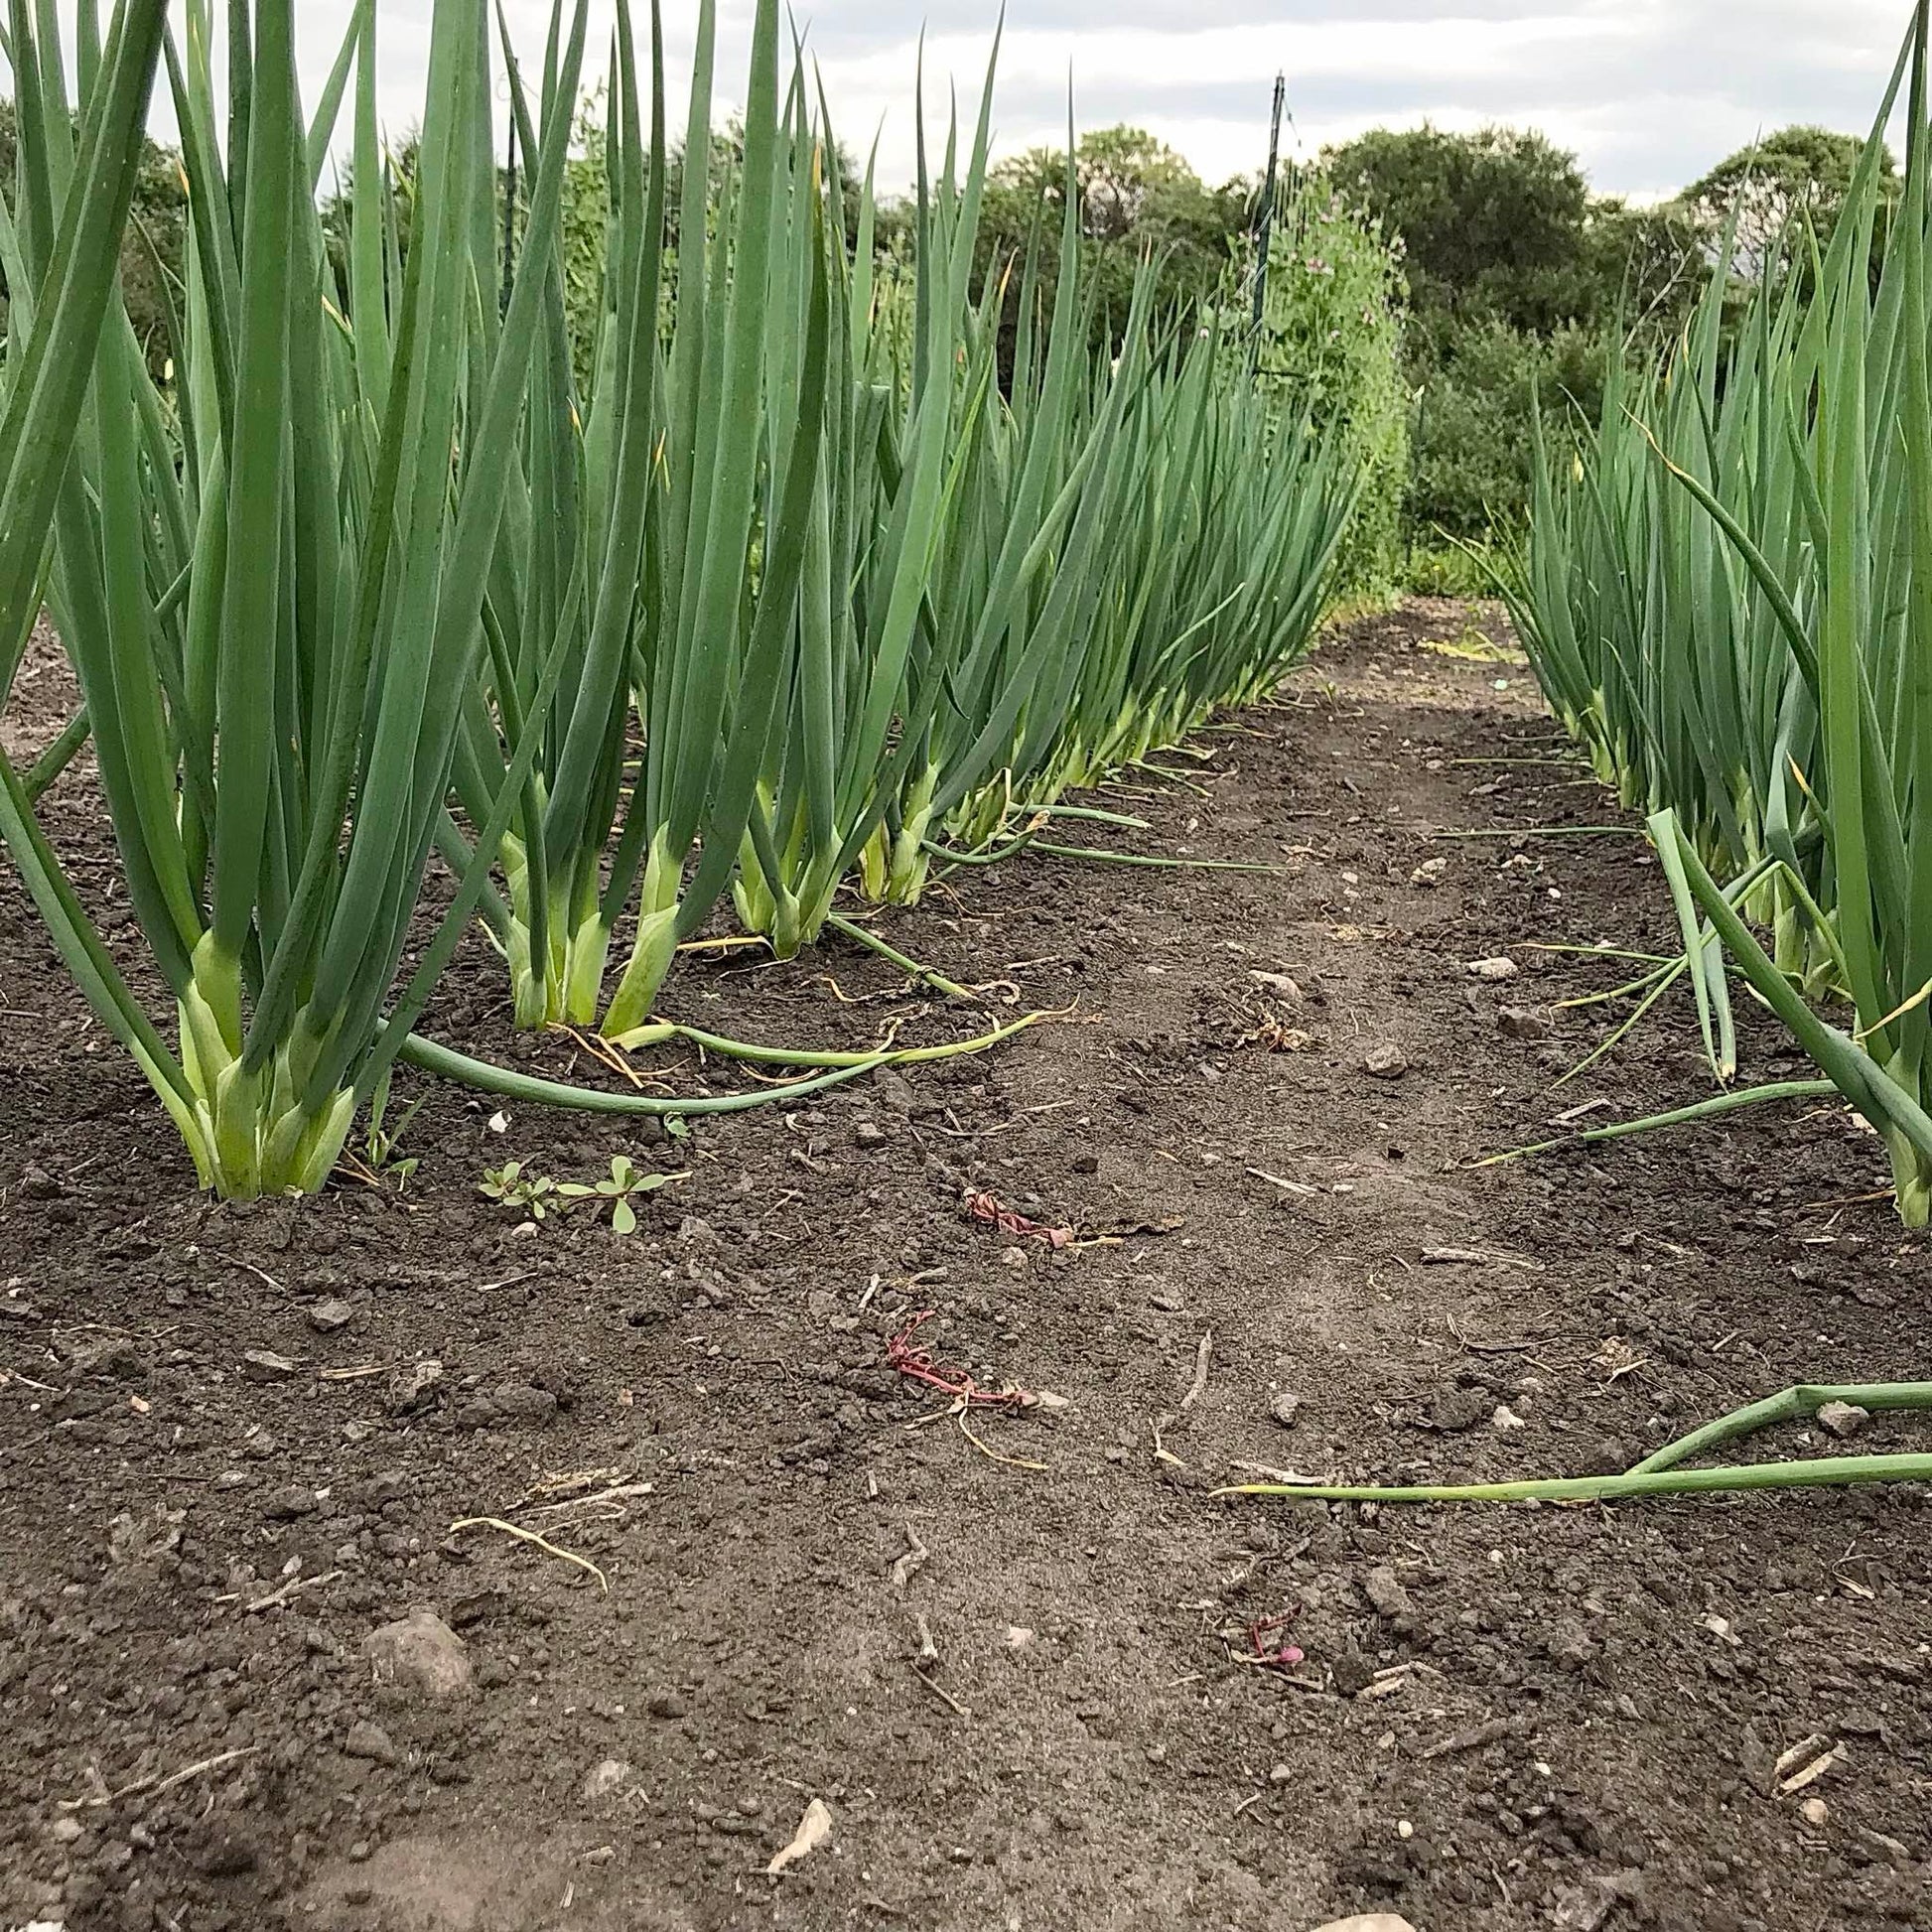 Ground level view of two rows of scallion plants.